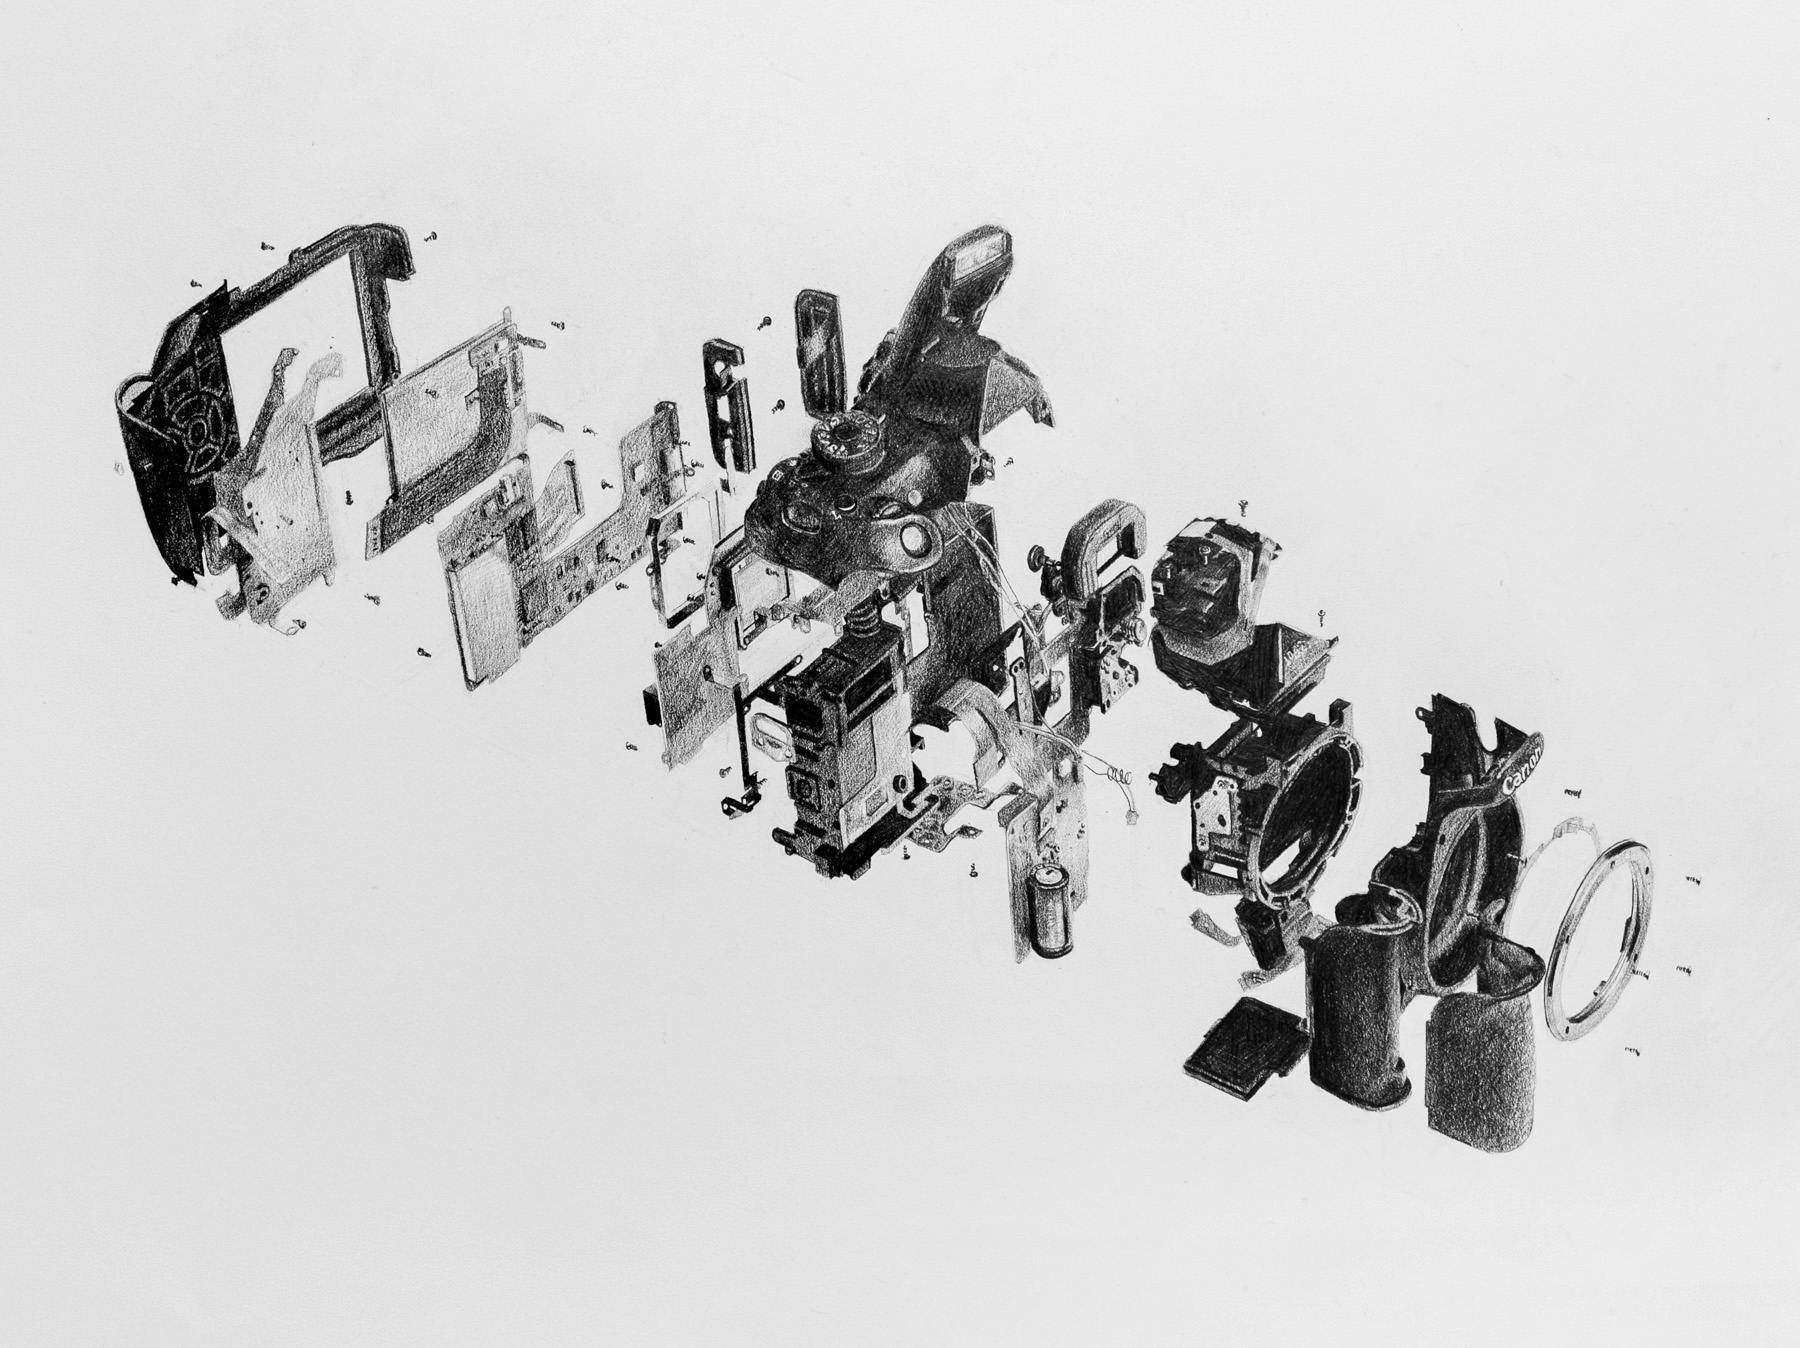 A shaded graphite render of an exploded Canon camera. Everything from the PCBs to the mirror box is visible.